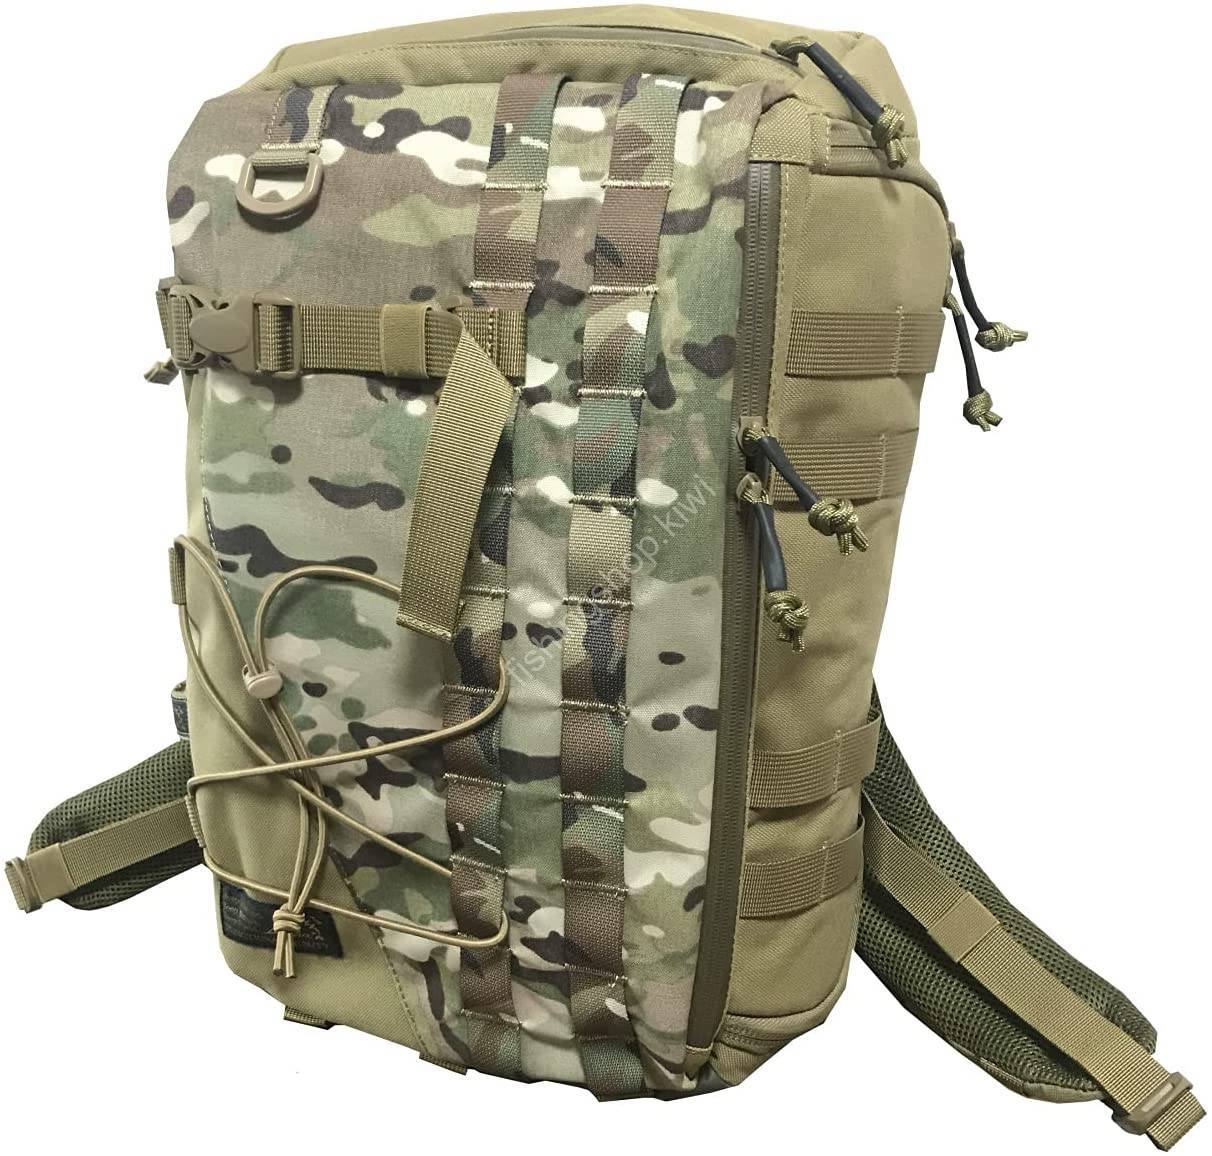 Fishing Bag Camouflage with 2 Tackle Boxes 45 x 25 x 22 cm